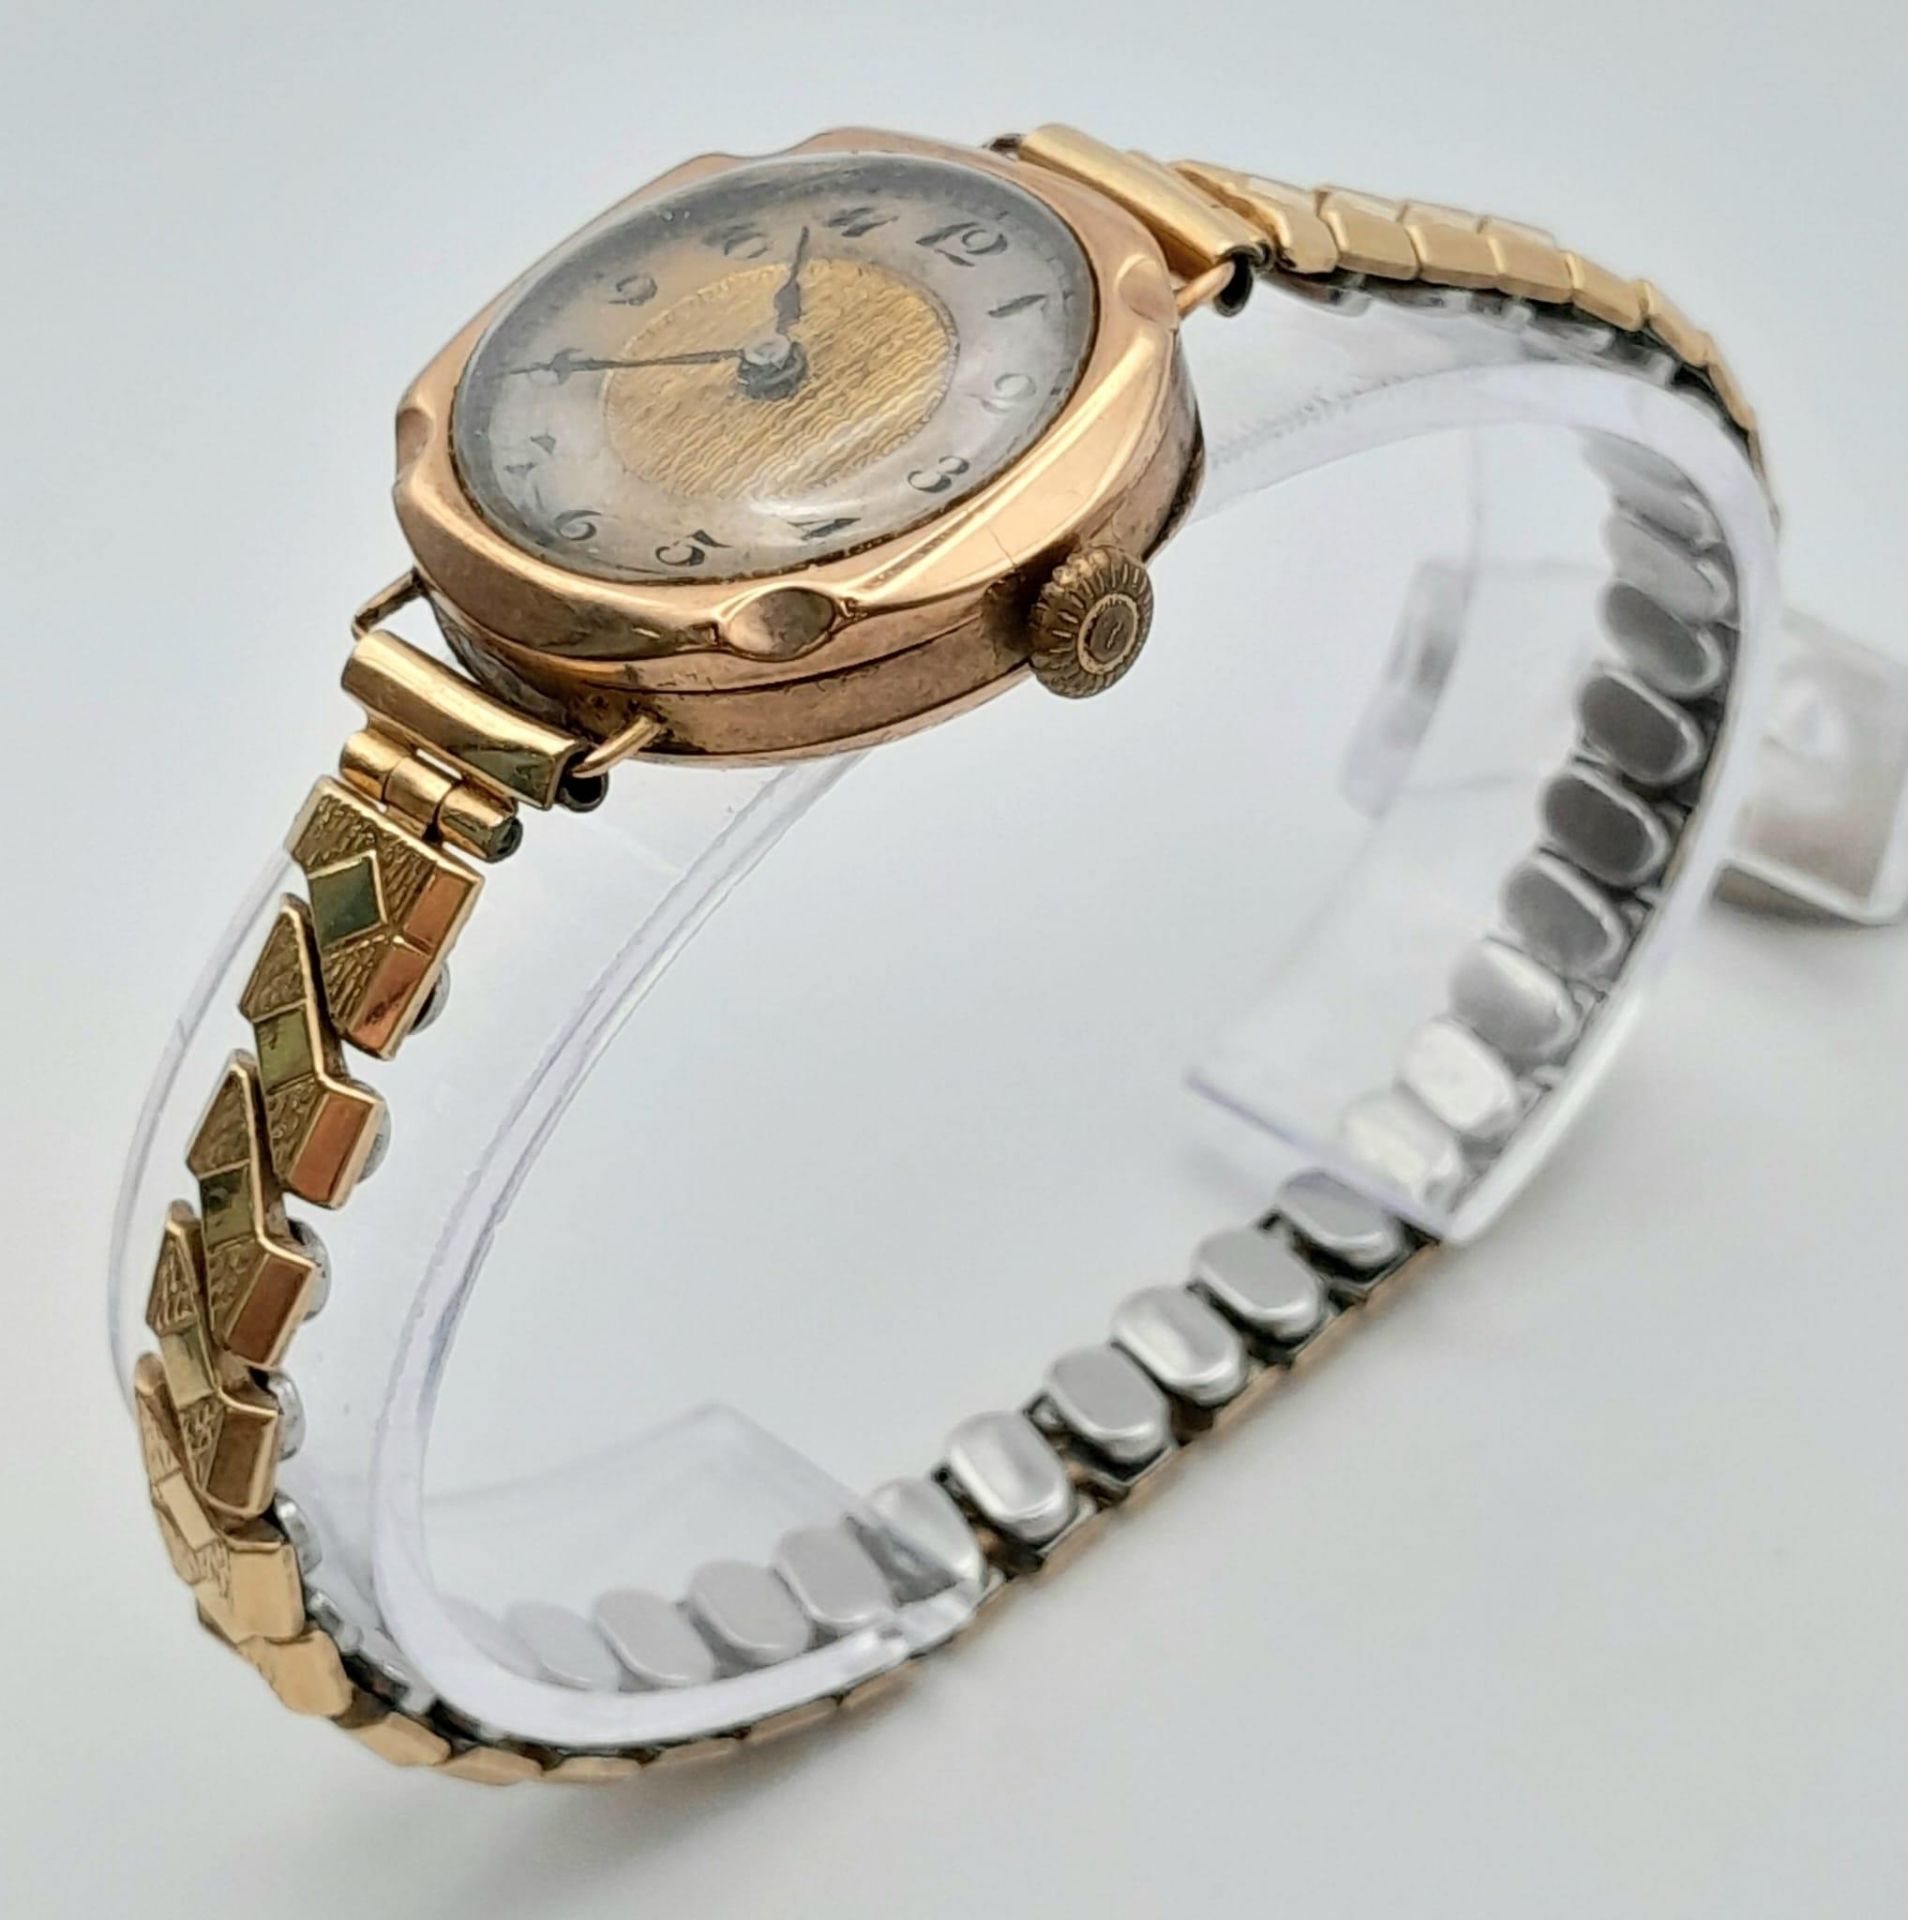 A Vintage 9K Gold Ladies Watch. Expandable gilded bracelet. 9K gold case - 26mm. Gilded dial with - Image 2 of 4